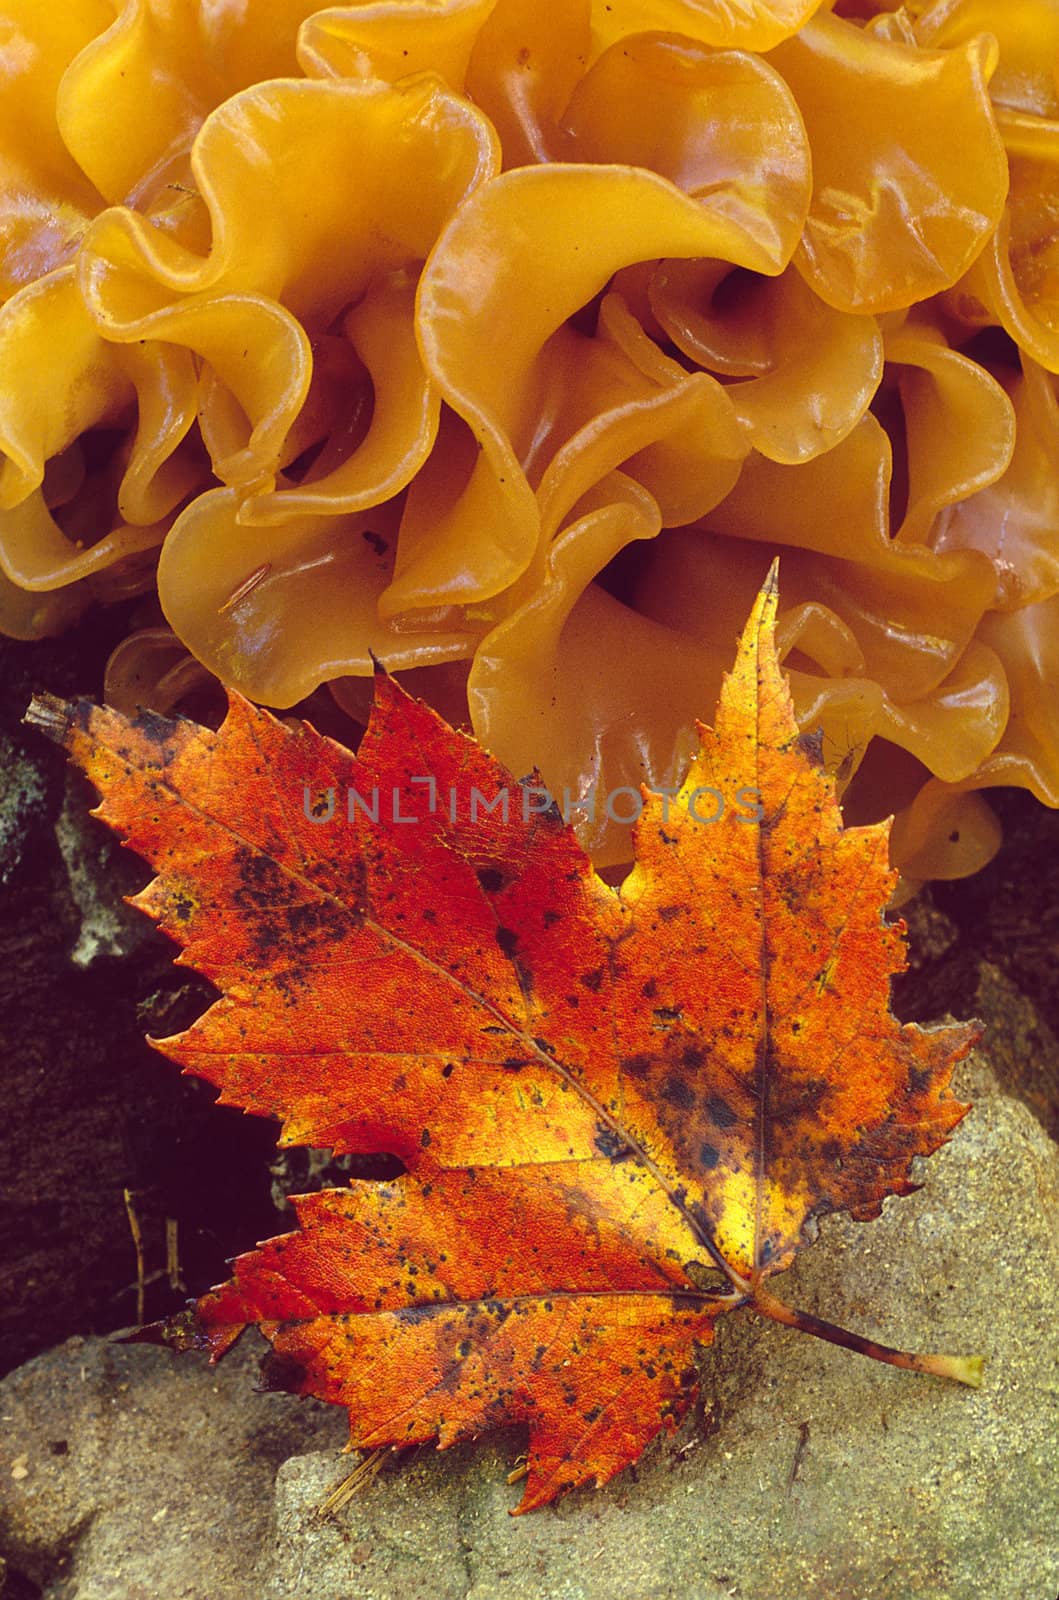 A red maple leaf with orange layered fungus